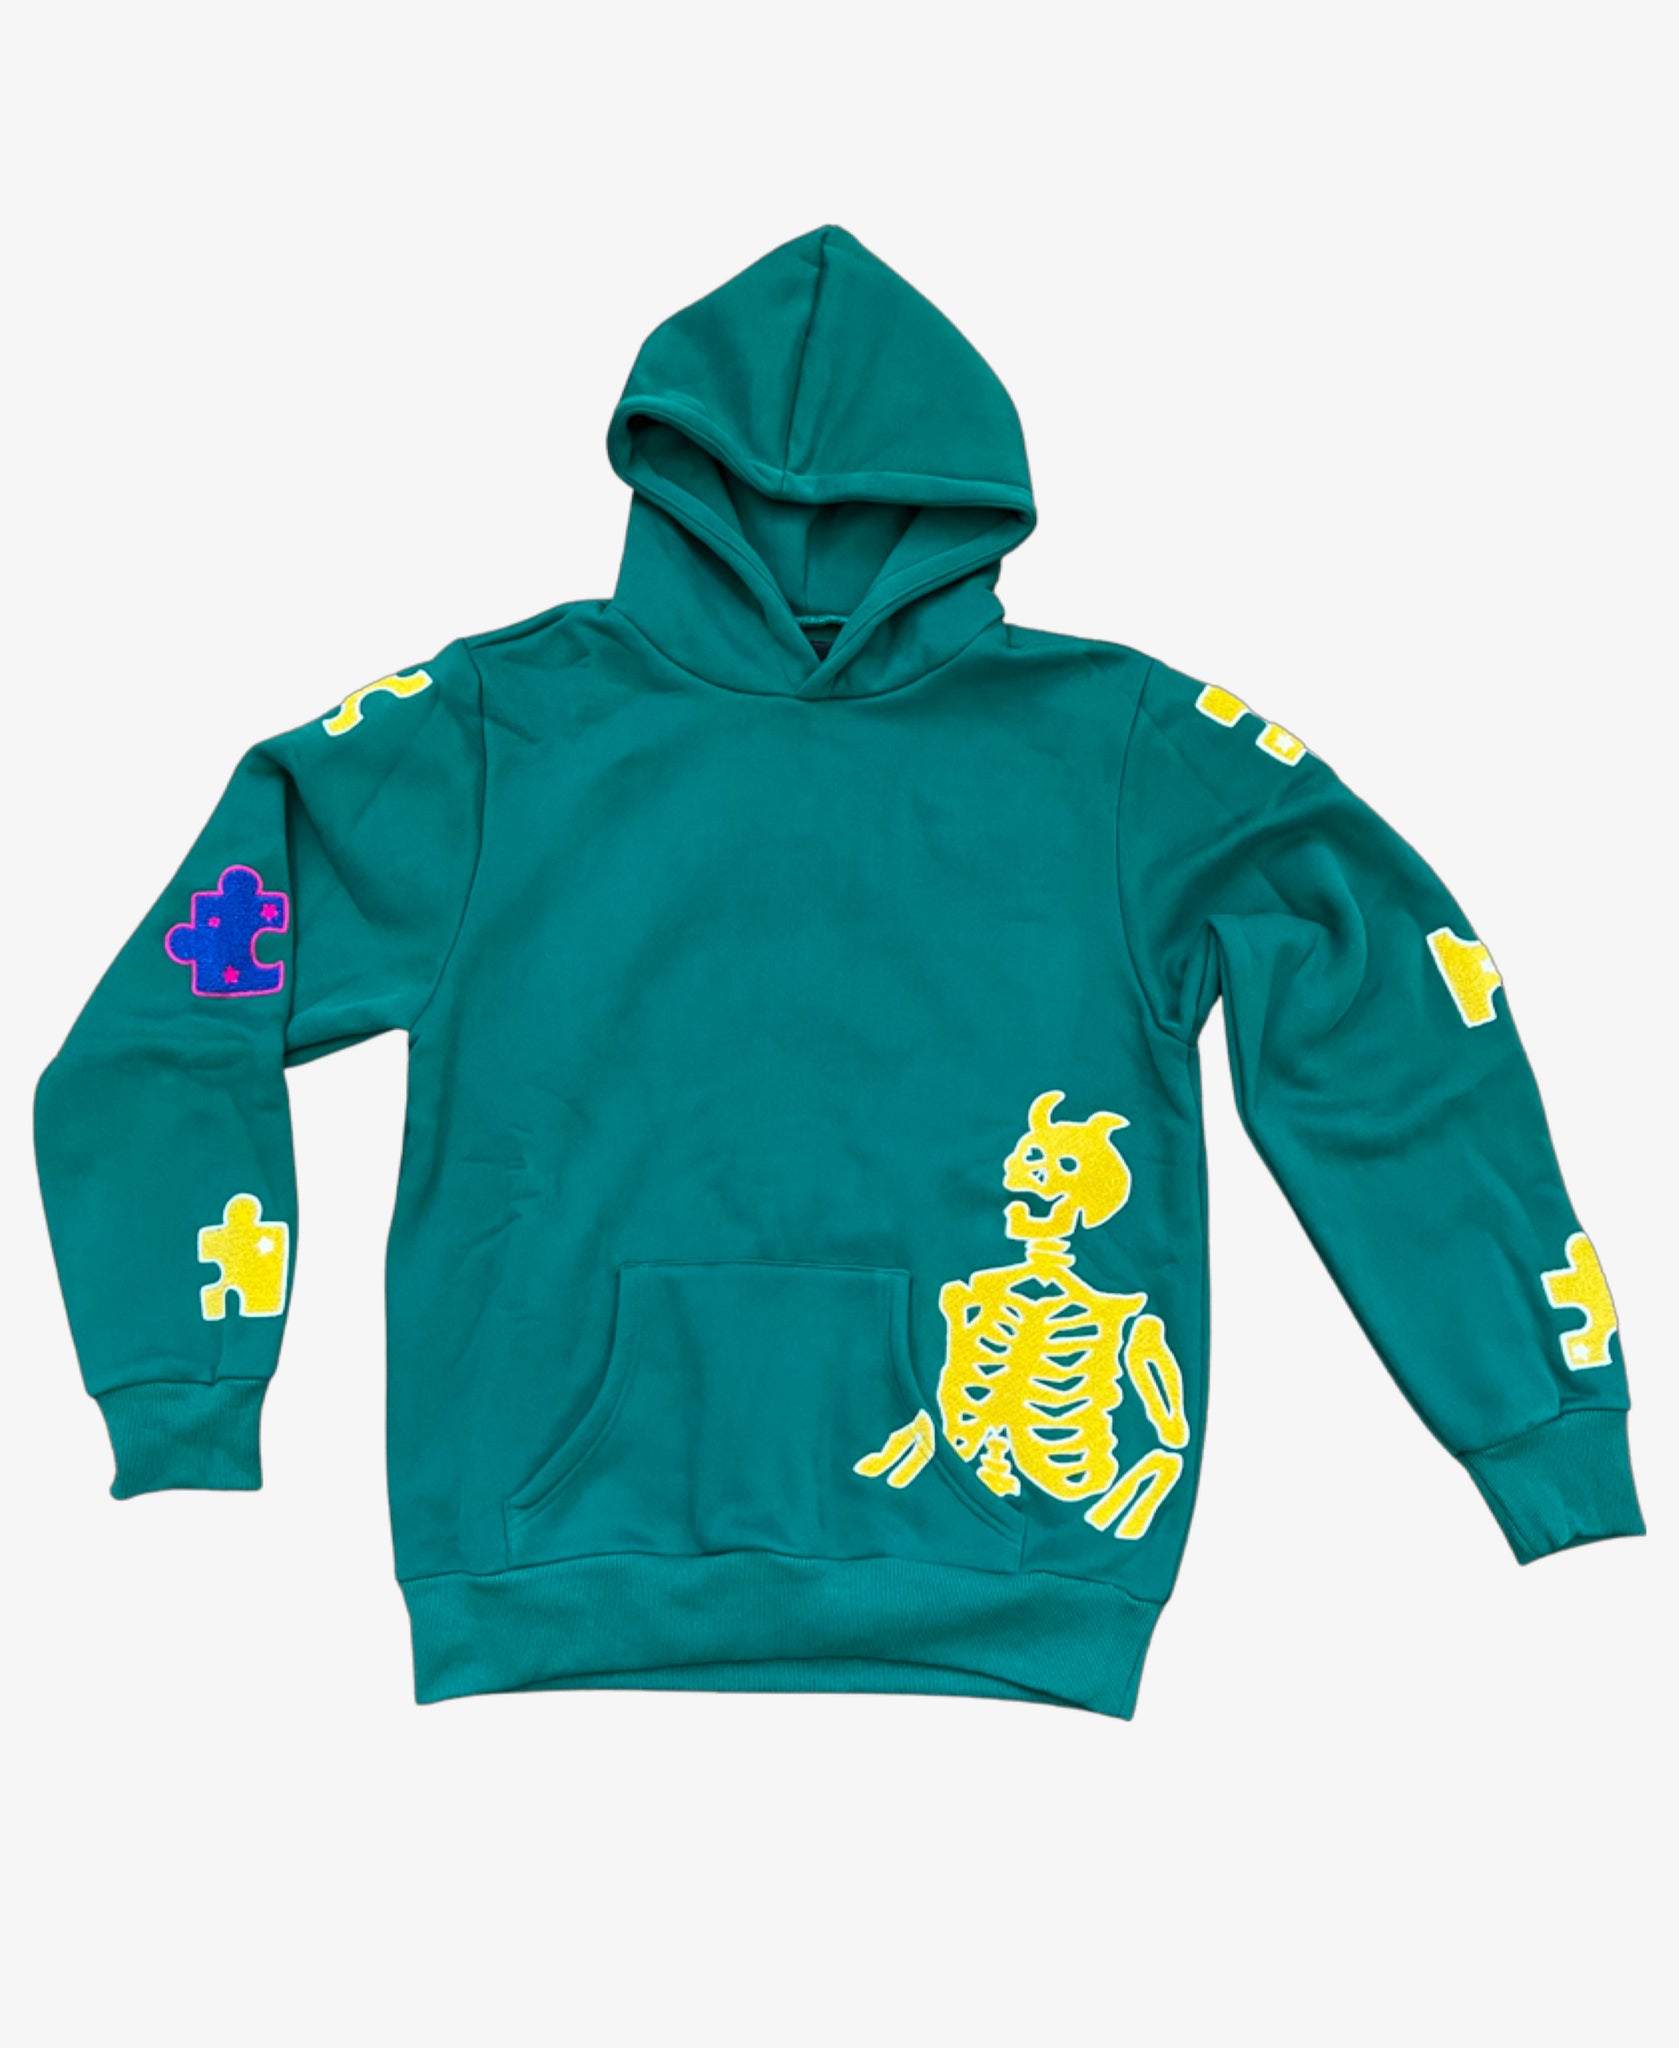 Visibility - Light Green and Yellow Skeleton Hoodie